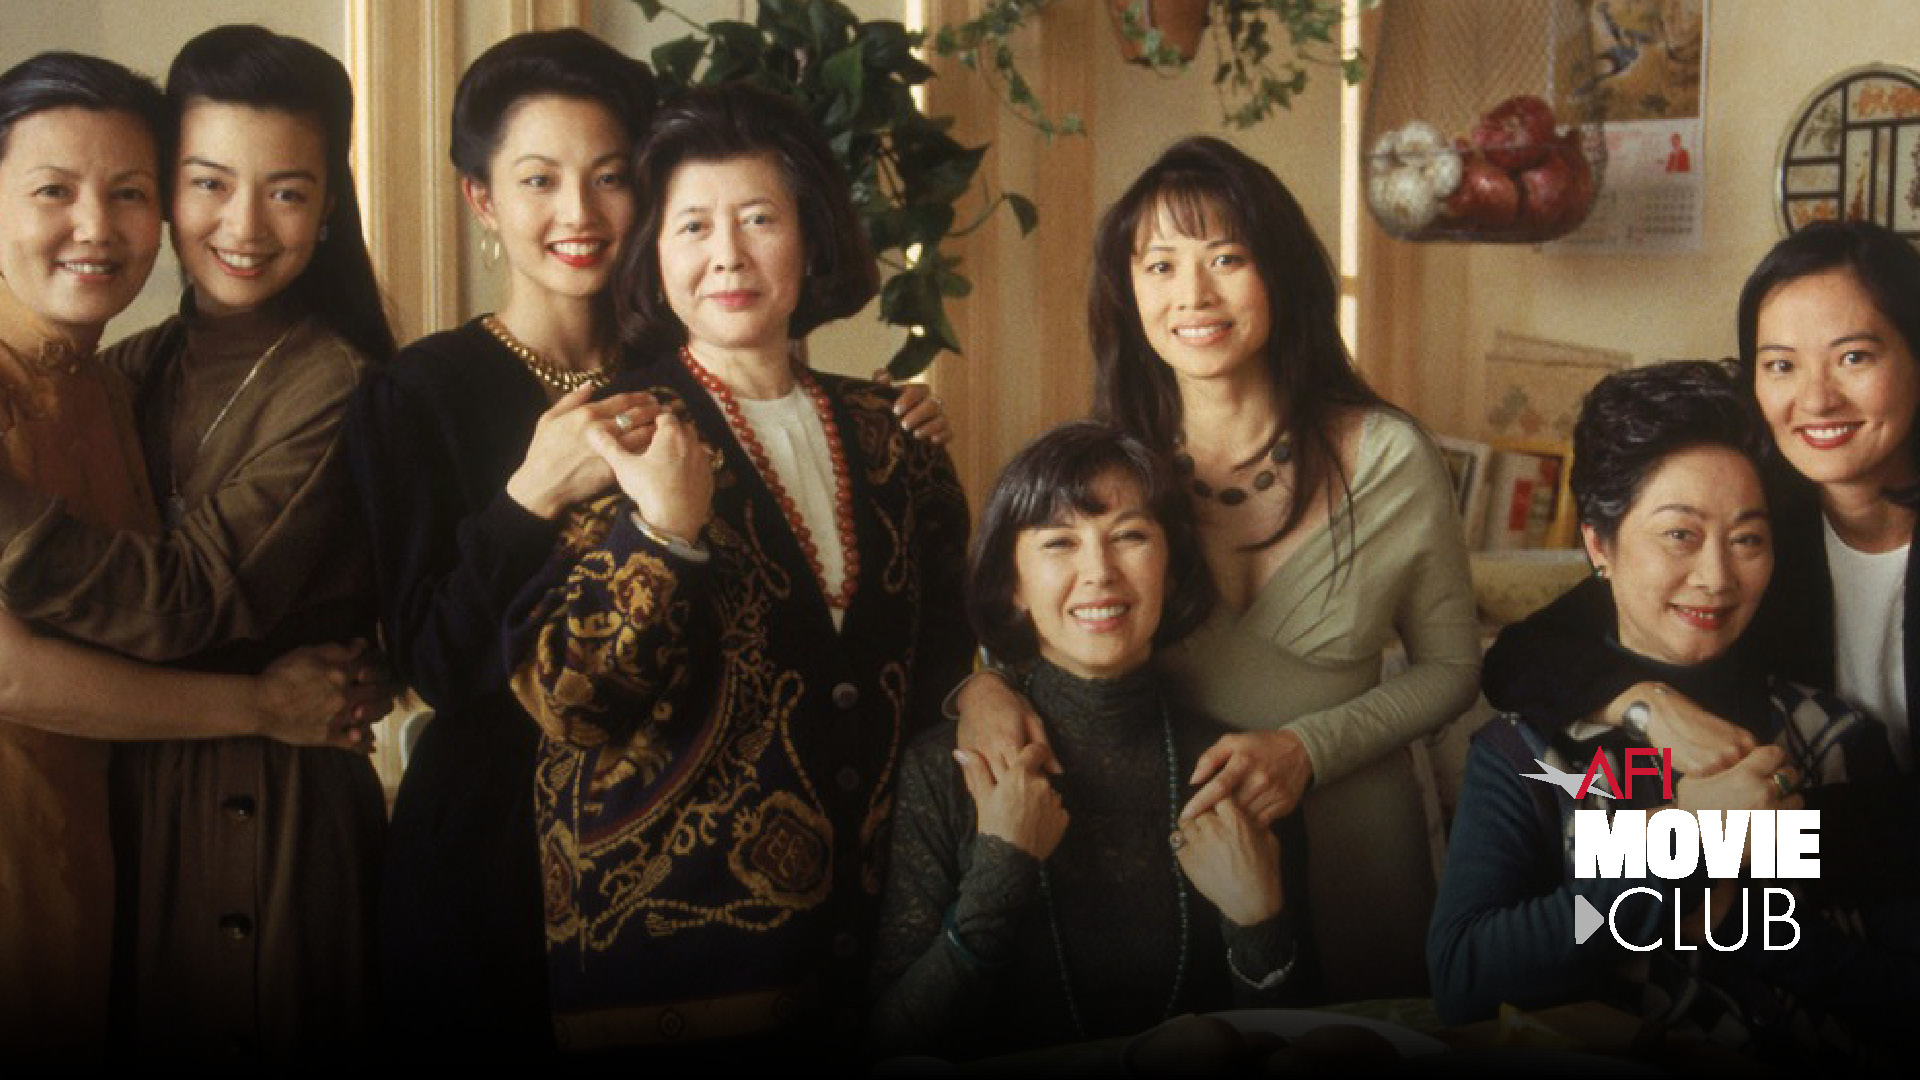 Still image of the women from the film THE JOY LUCK CLUB